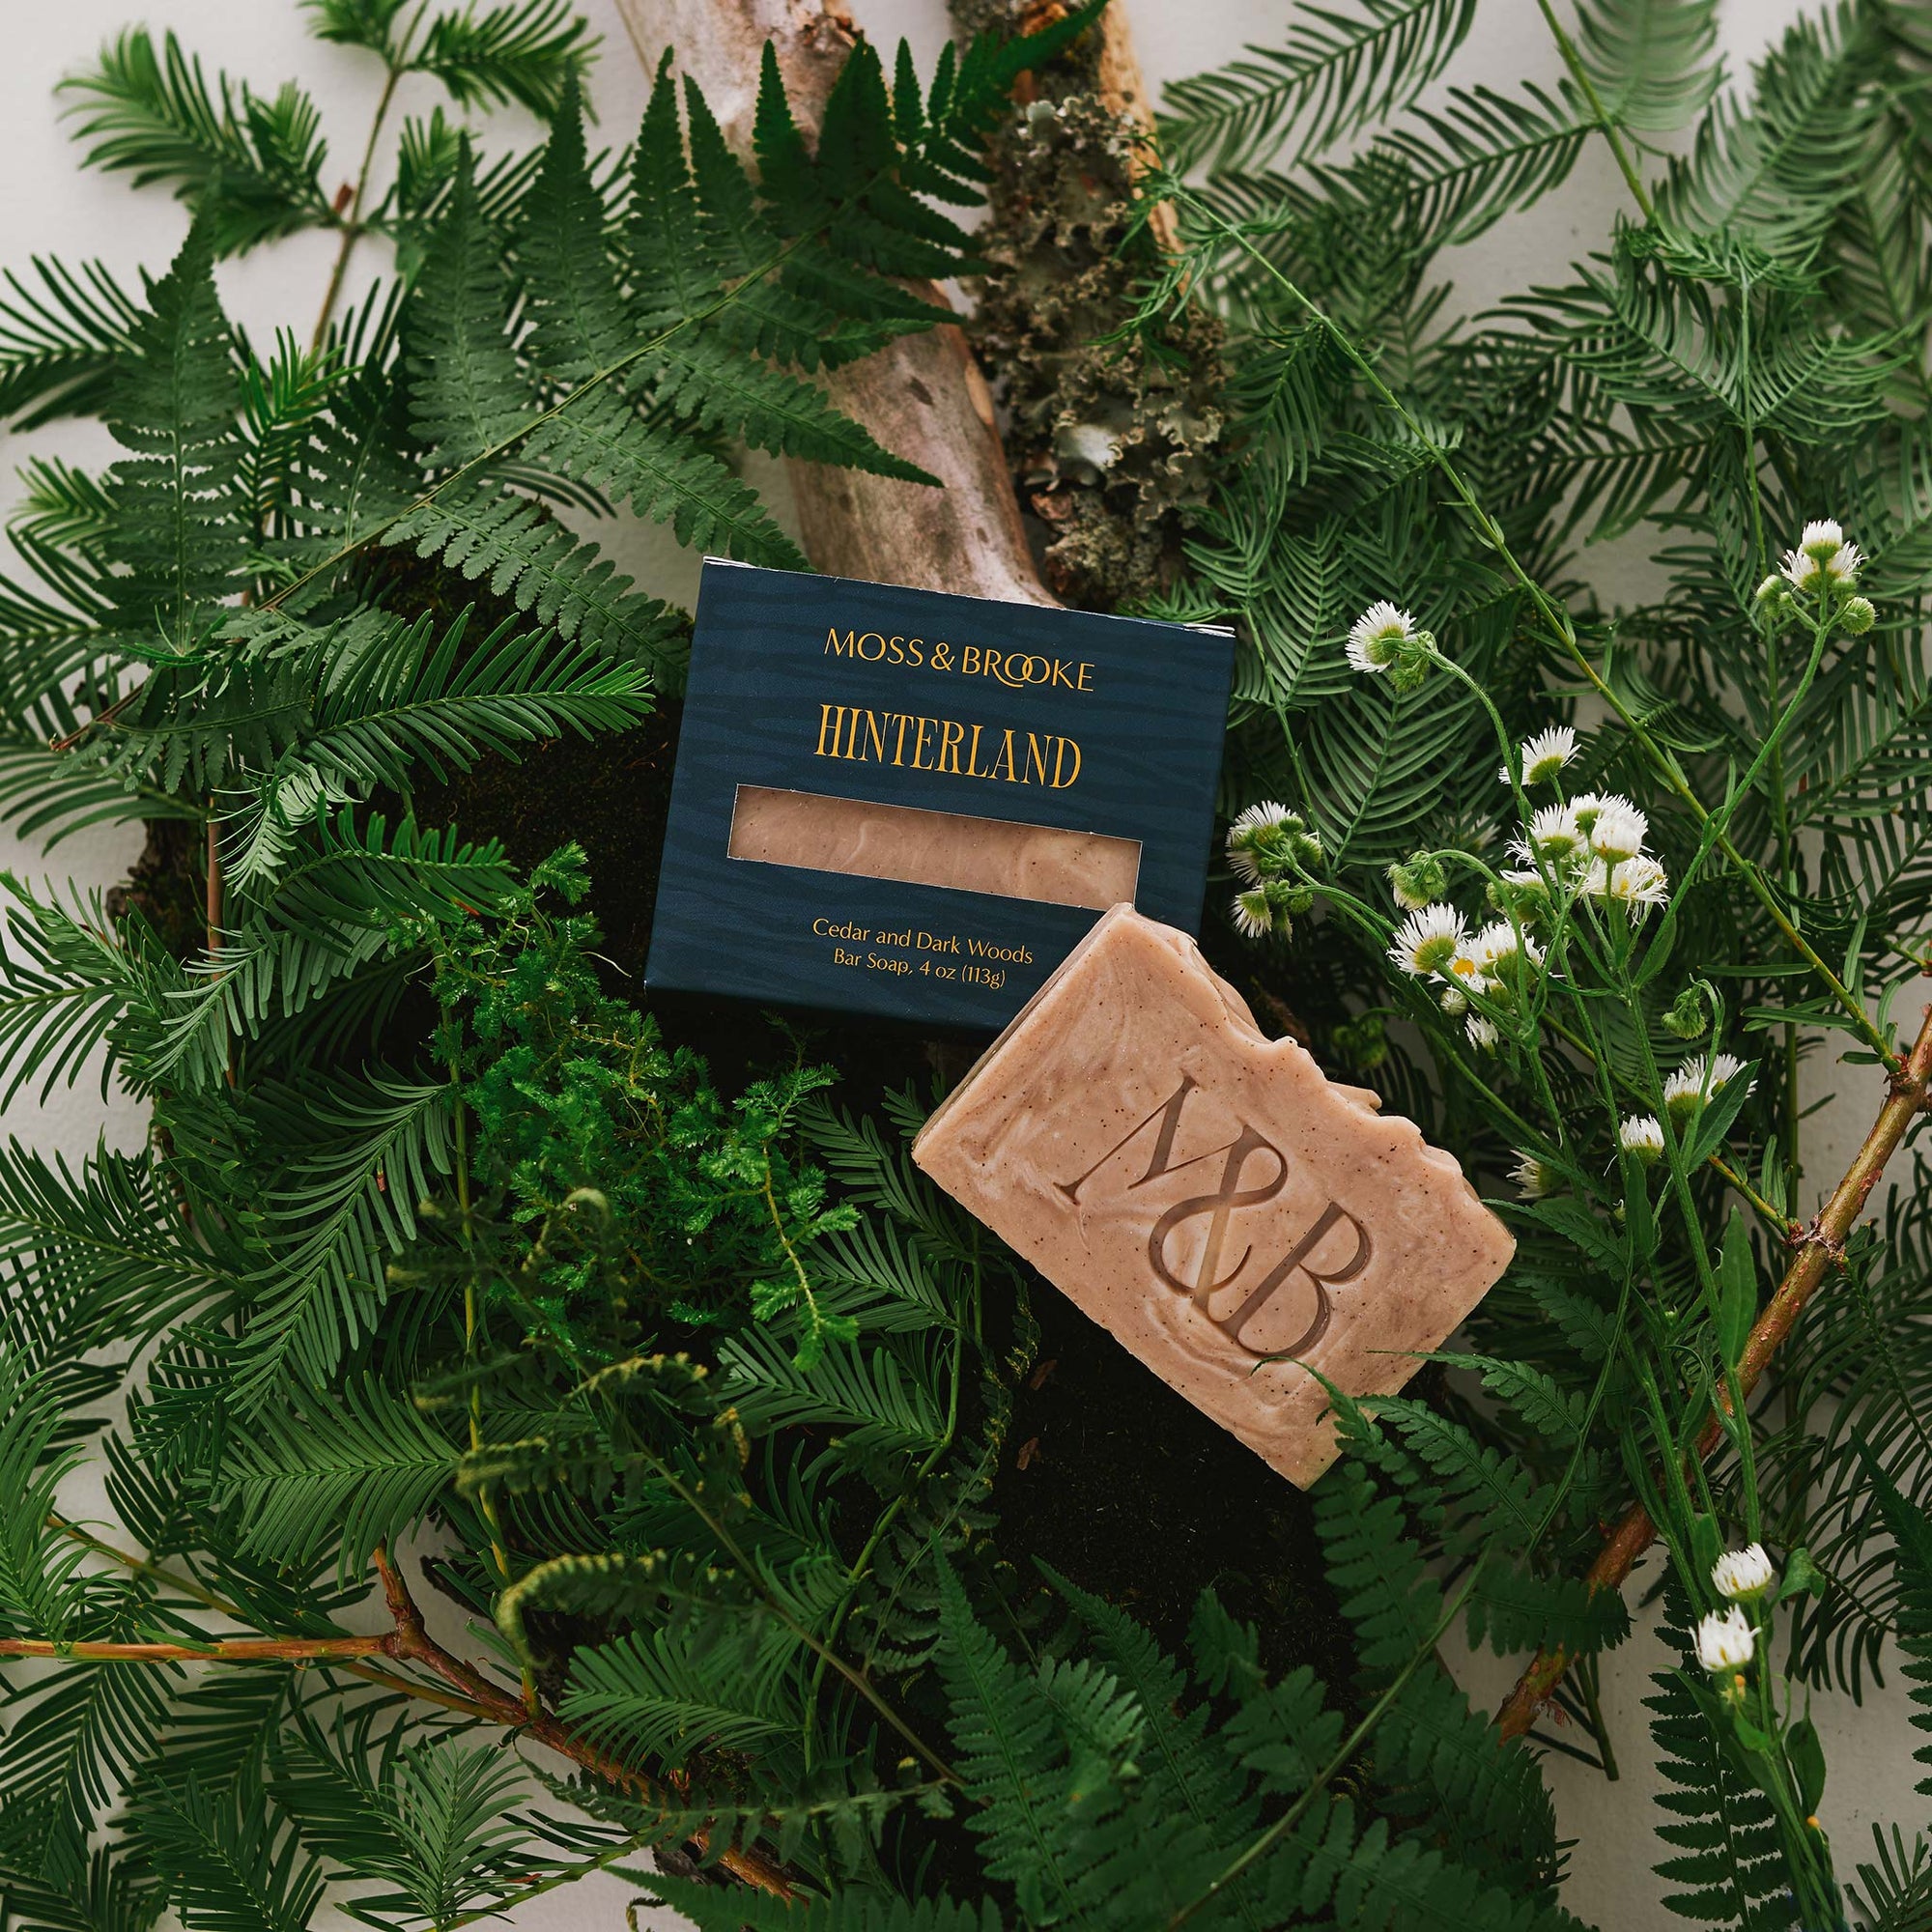 Image of Moss and Brooke Hinterland bar soap sitting on bed of greenery and ferns in a forest background. Goat milk exfoliating bar soap in a teal tree bark texture box with metallic gold text.